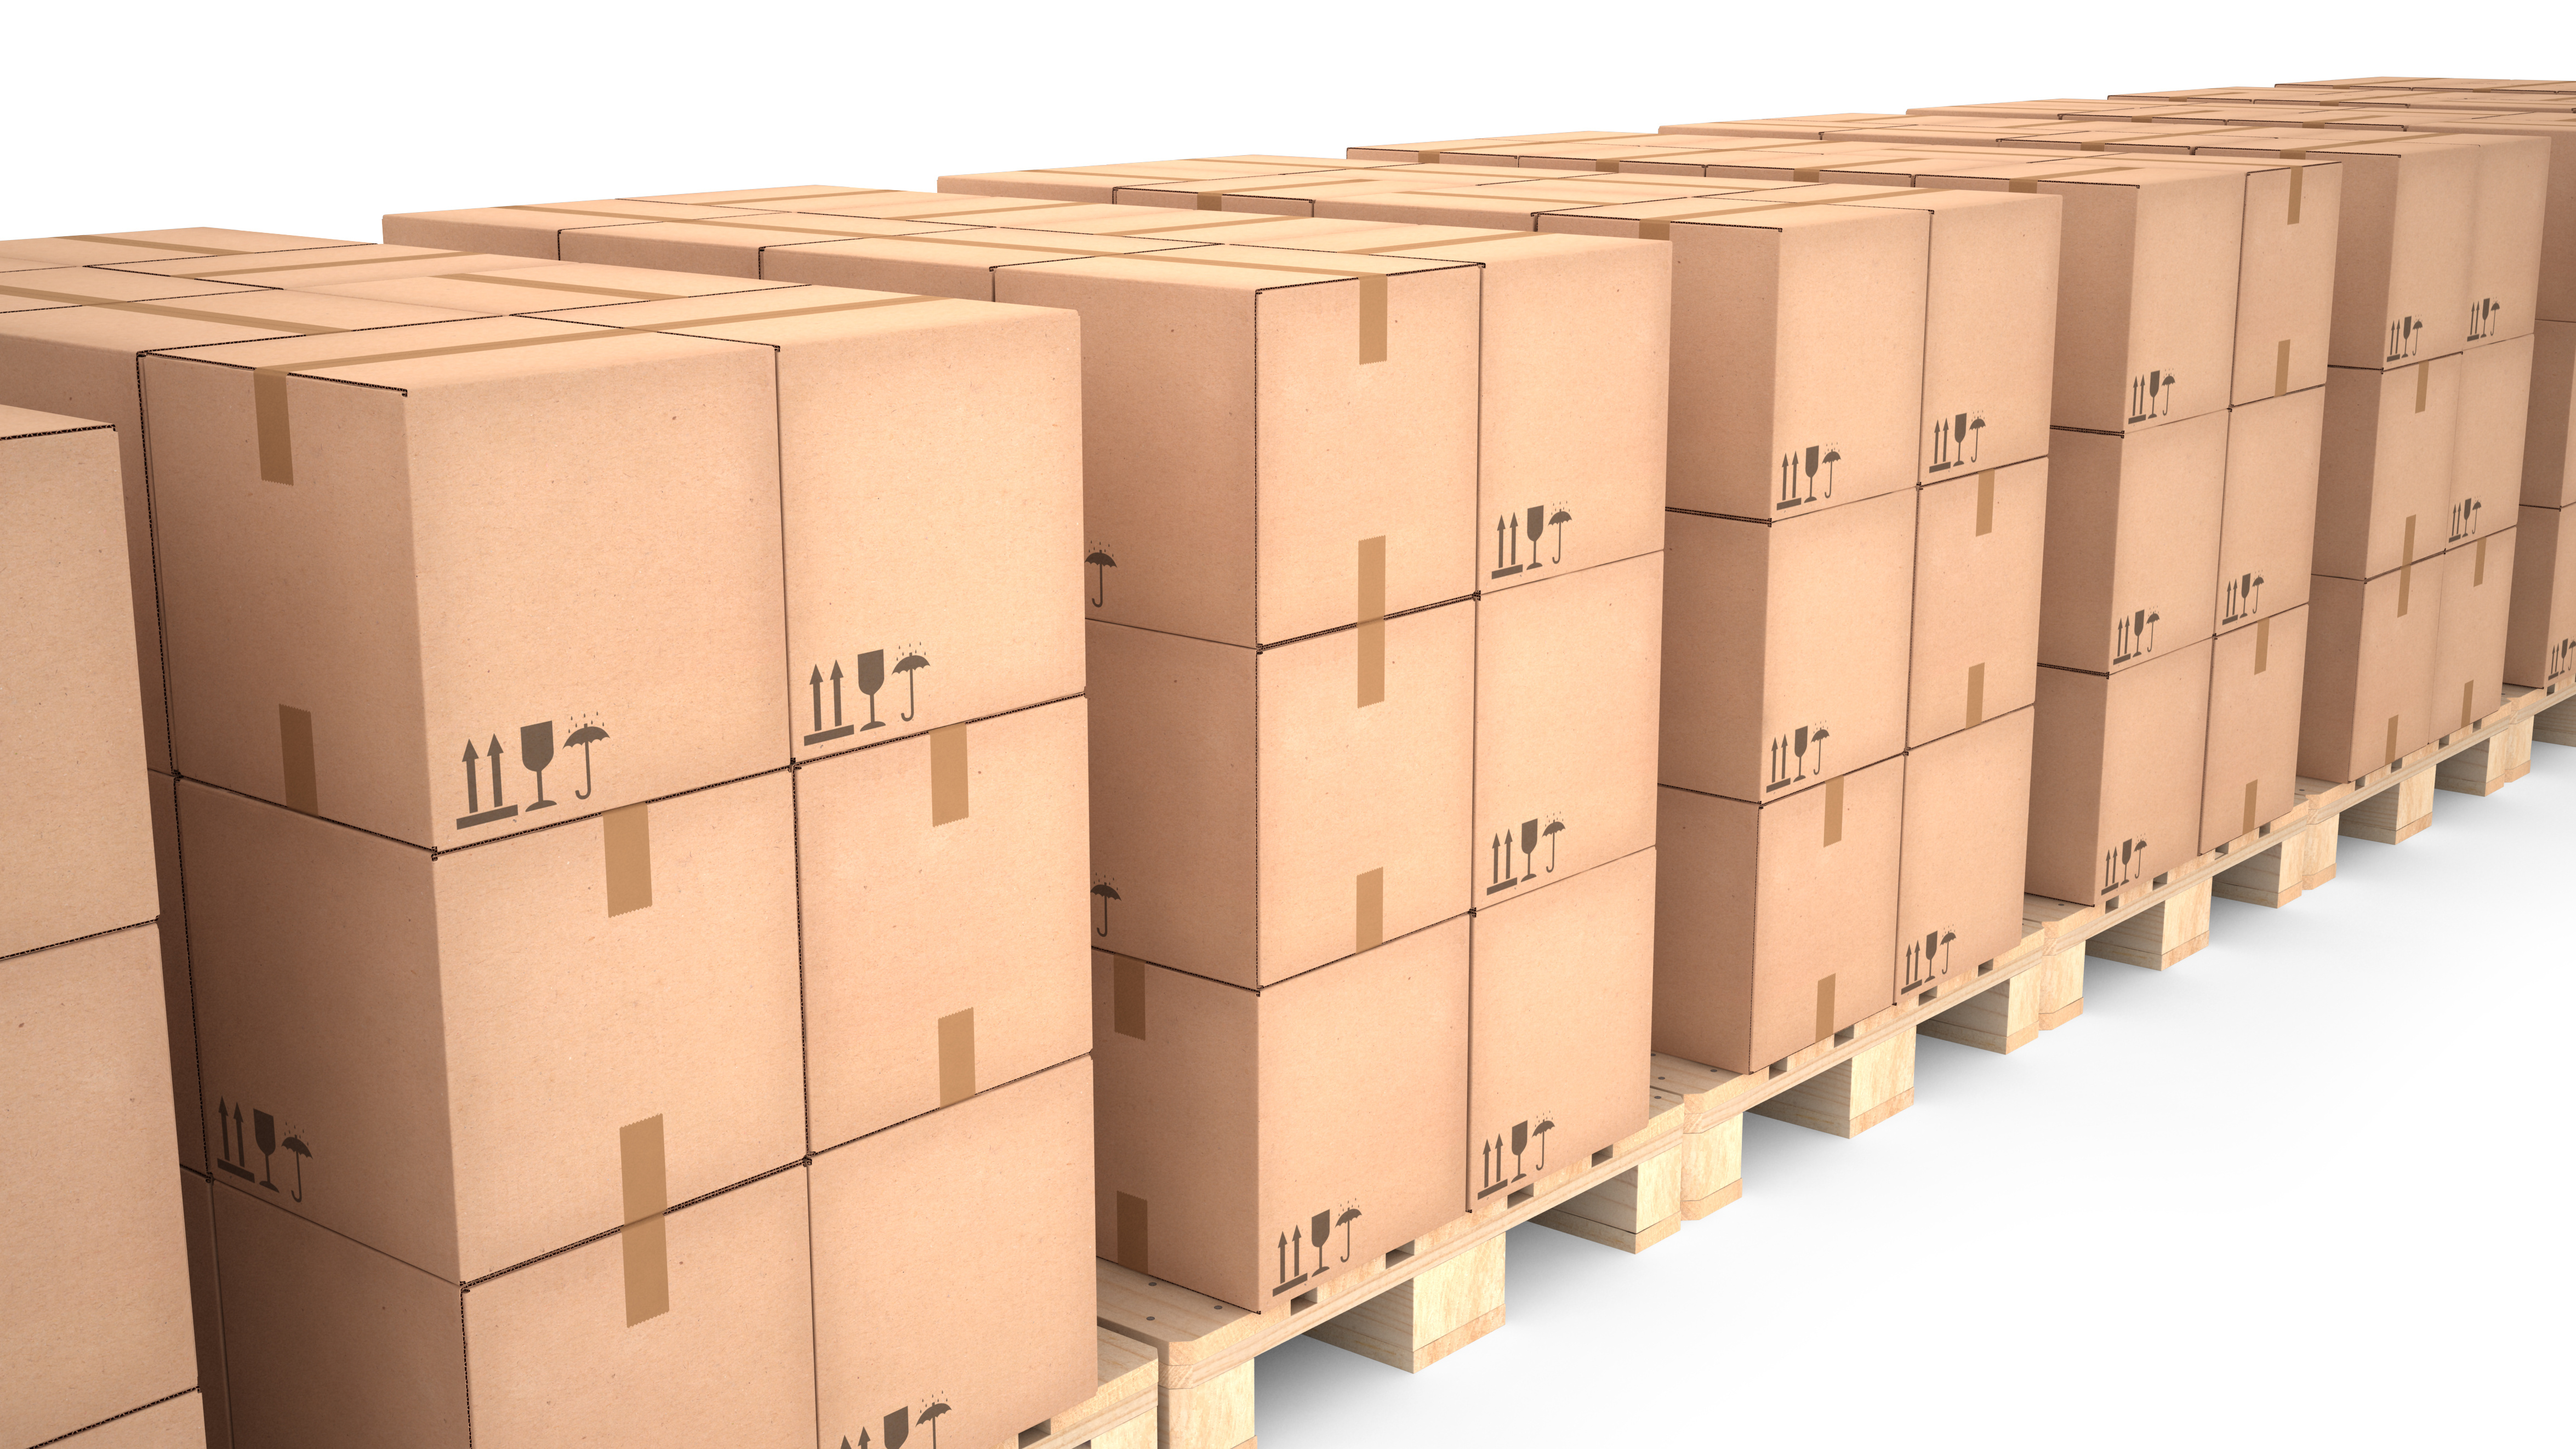 Boxes stacked in storage rooms